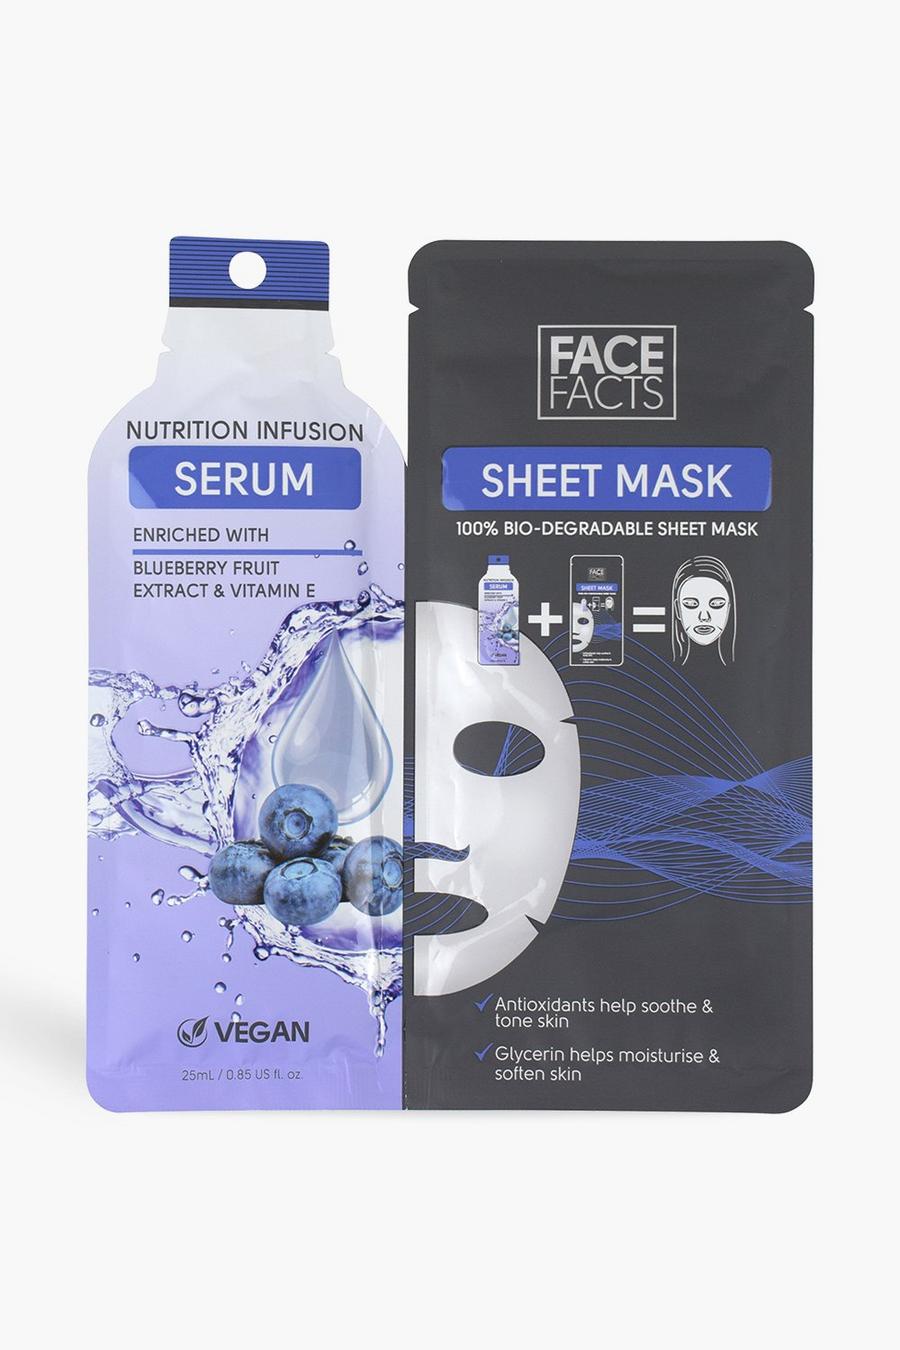 Blue blau Face Facts Serum Sheet Mask Nutrition Infuse